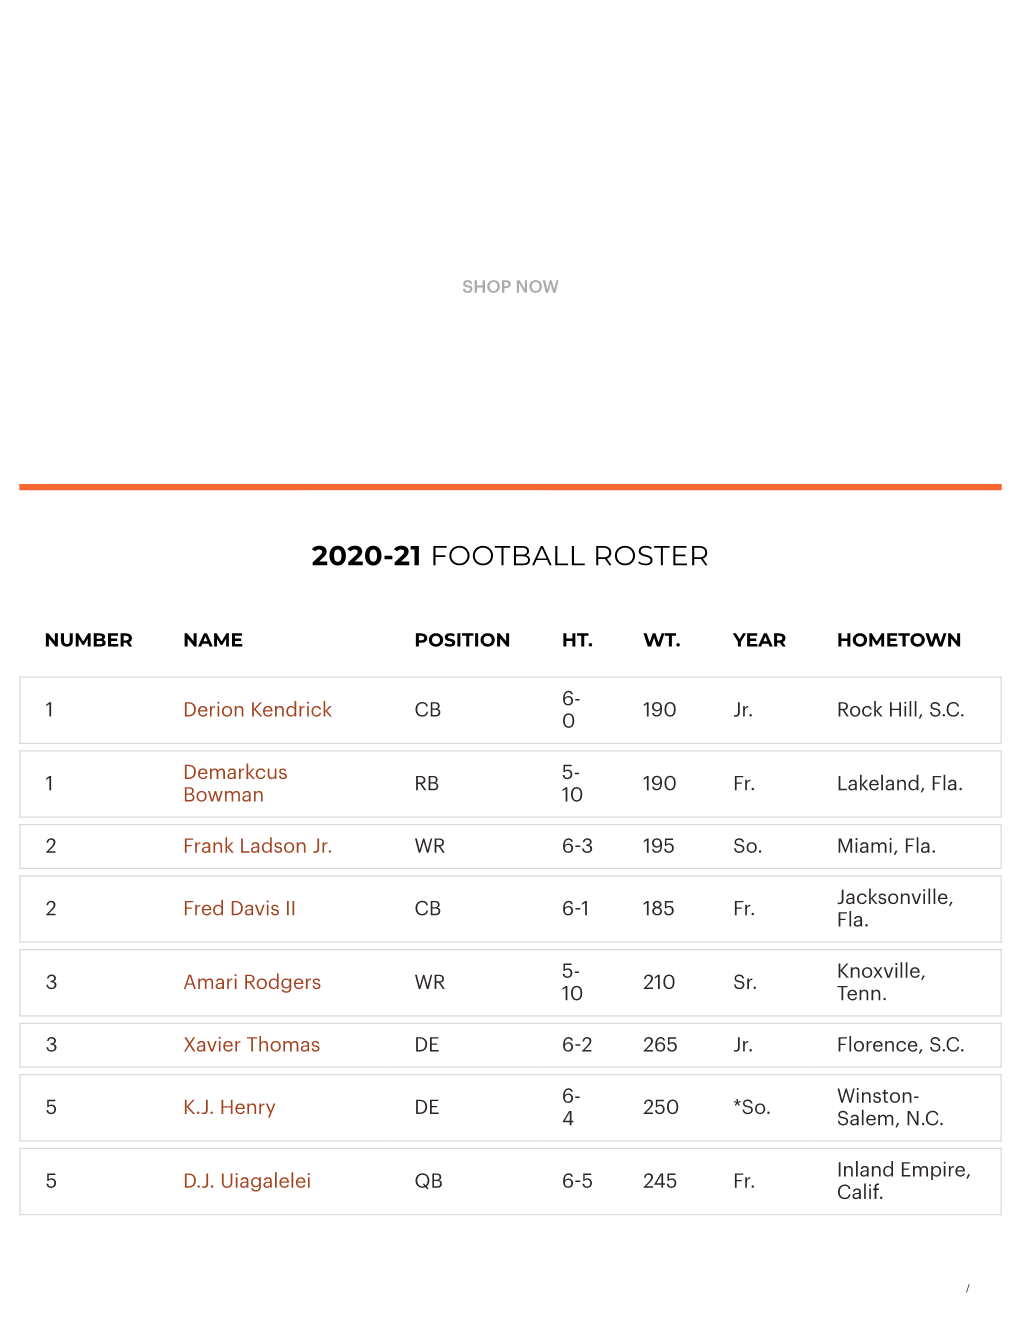 2020-21 Football Roster